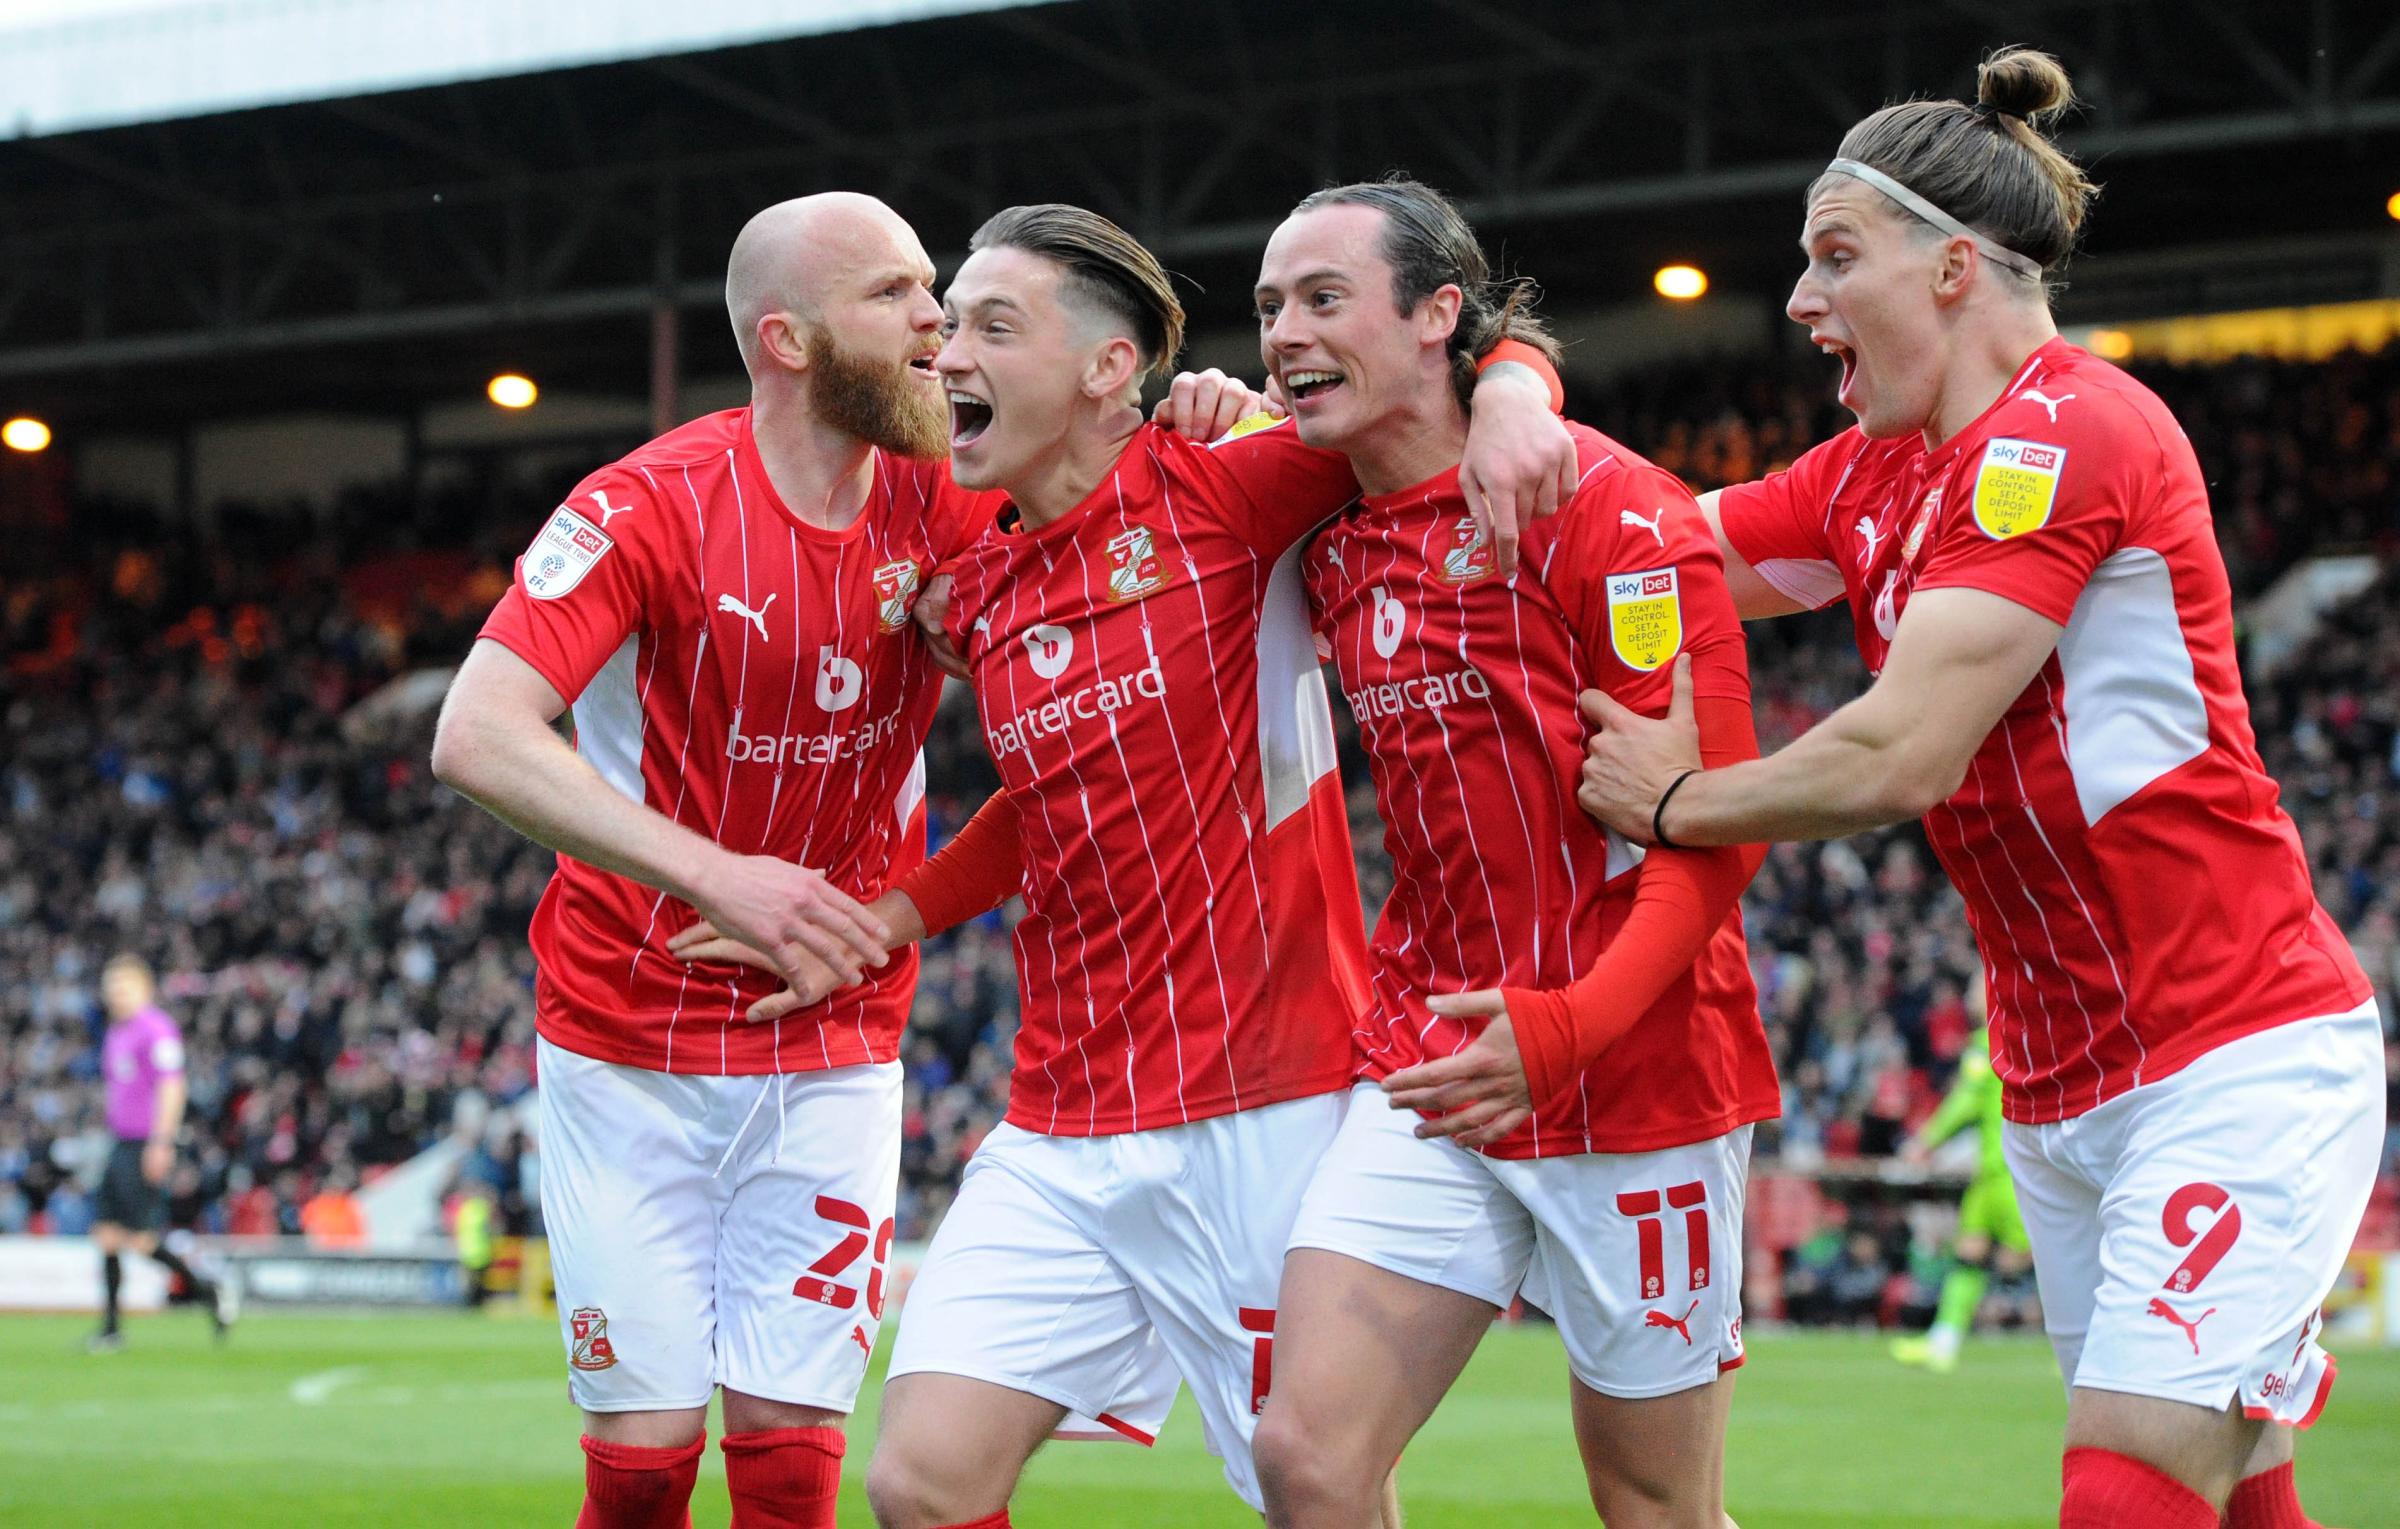 Swindon Town beat Forest Green Rovers 2-1 to keep League Two play-off hopes alive